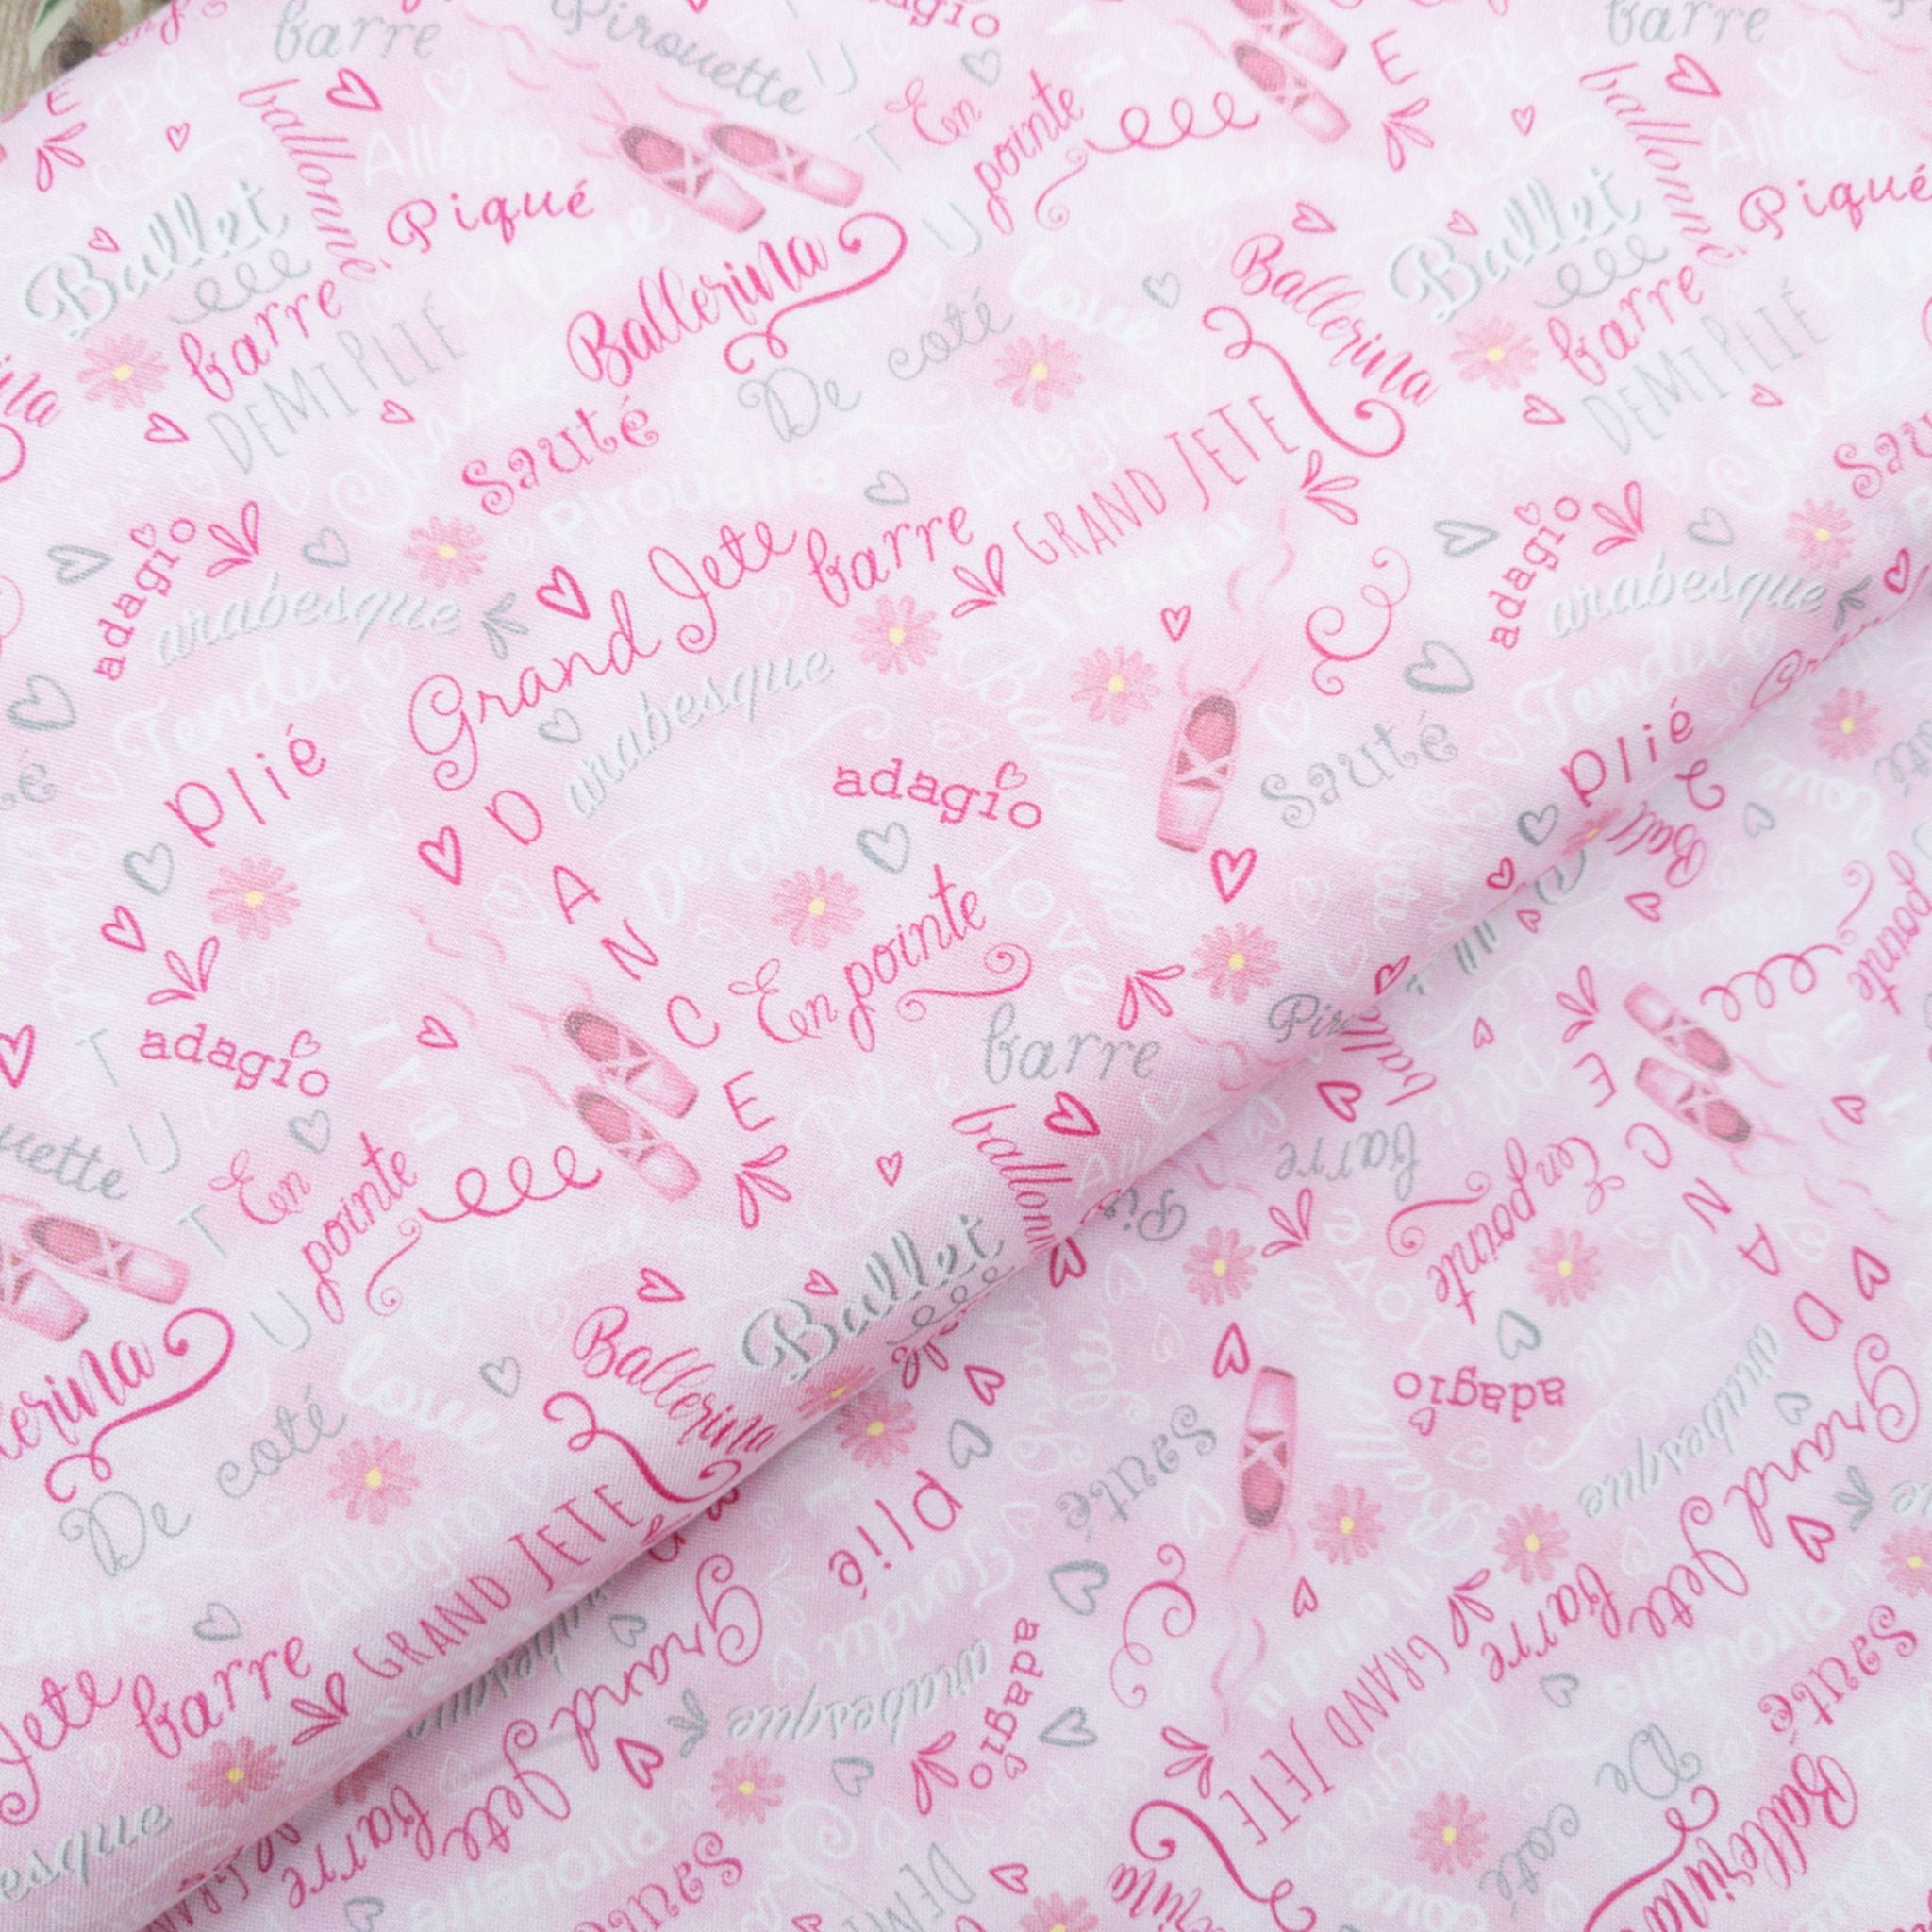 ballet slippers and words on pink cotton fabric - Ballet Bunnies - Timeless Treasures